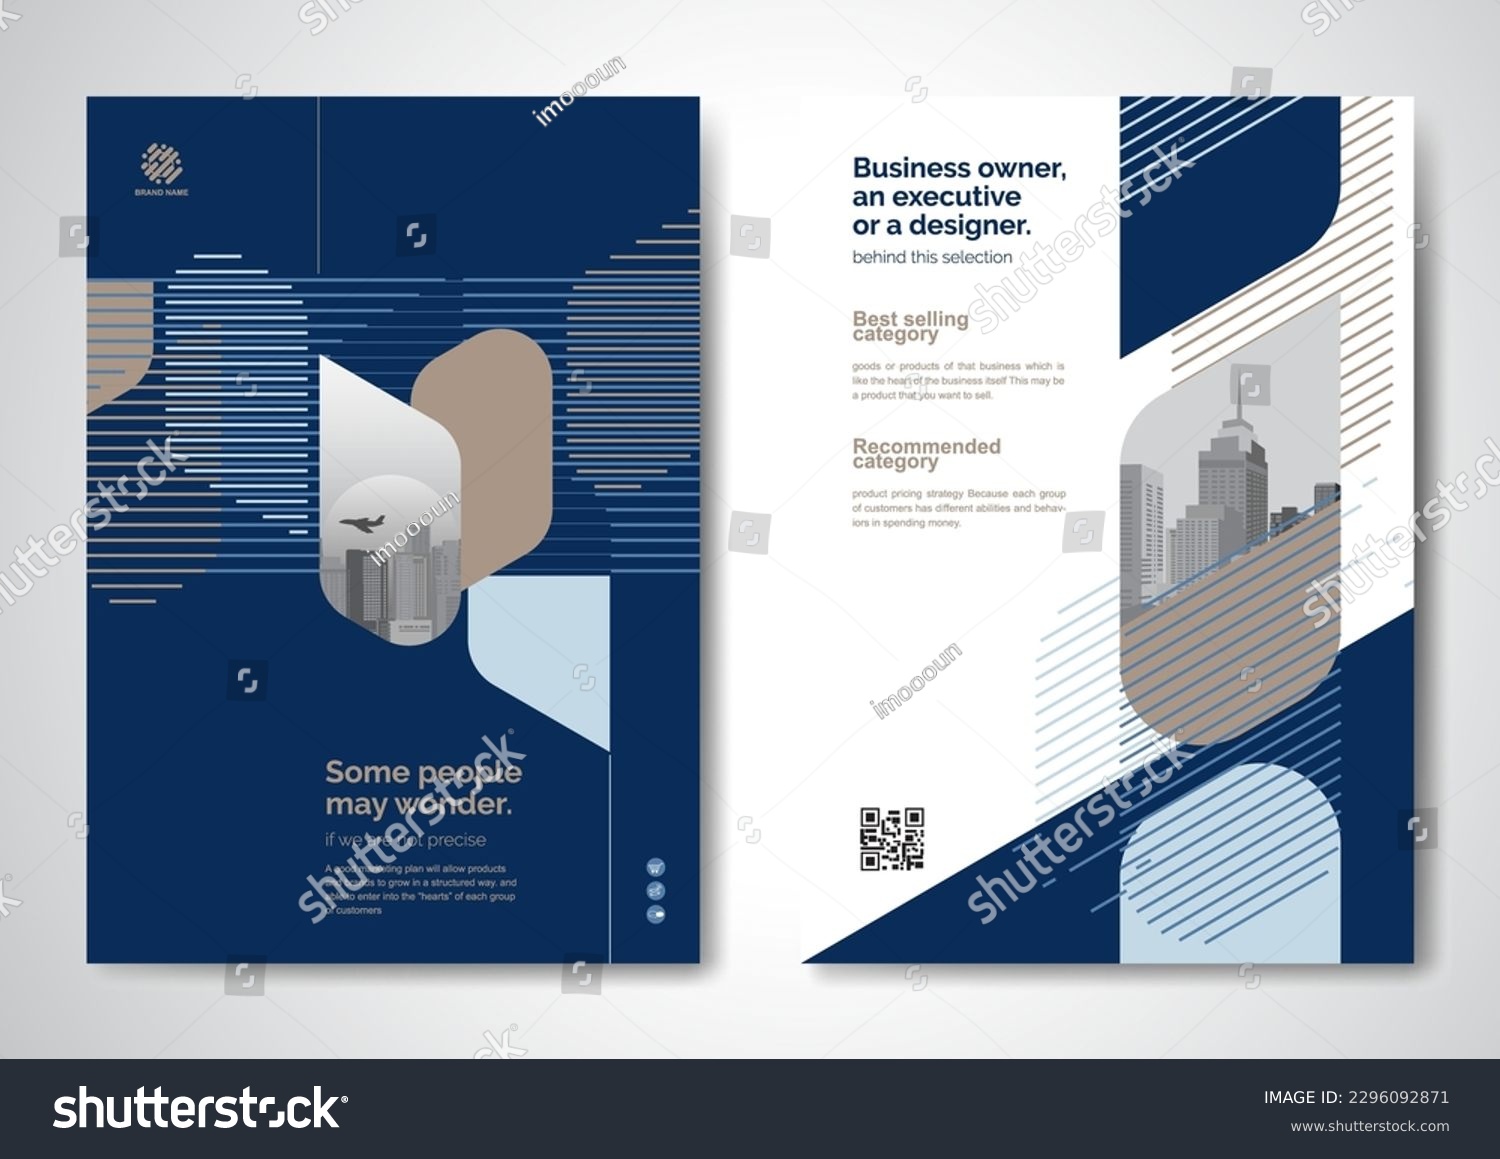 Template vector design for Brochure, AnnualReport, Magazine, Poster, Corporate Presentation, Portfolio, Flyer, infographic, layout modern with blue color size A4, Front and back, Easy to use and edit. #2296092871